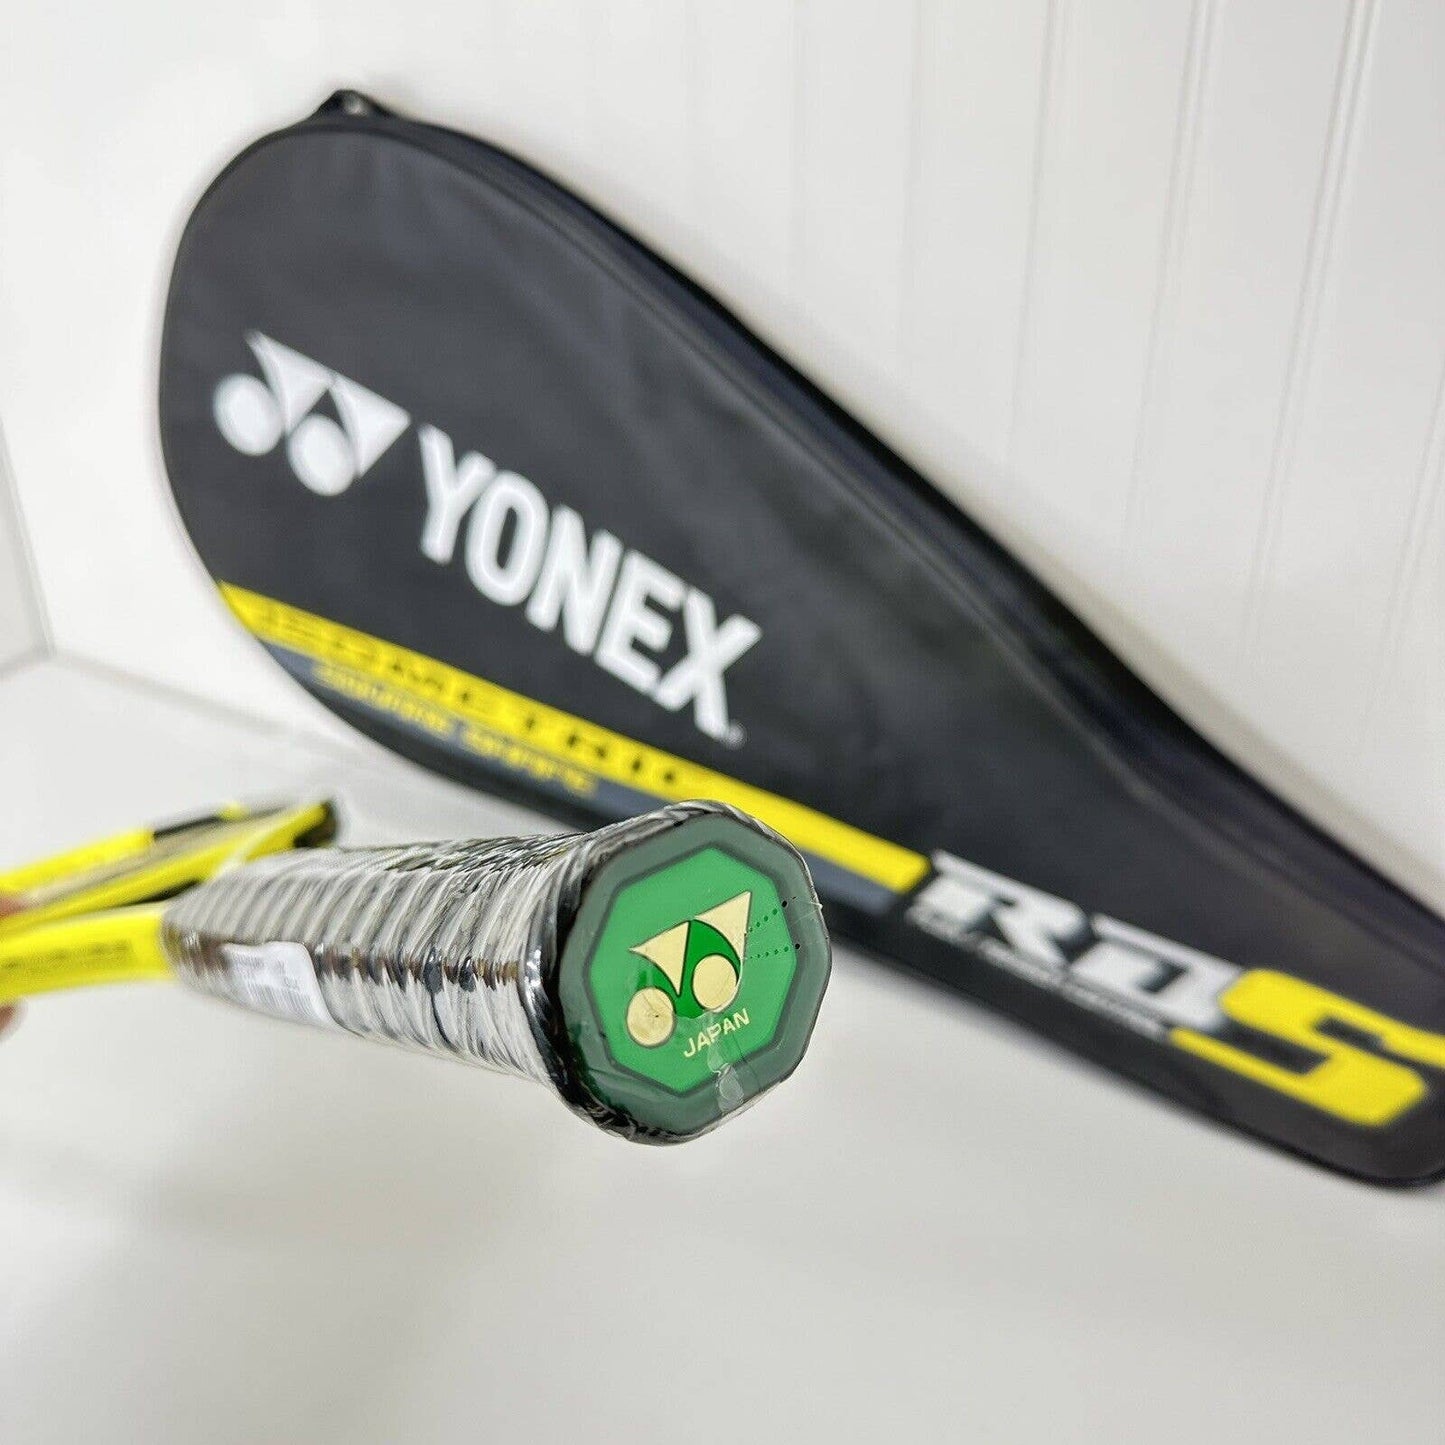 YONEX RDS 001 MP 98 Sq. In. Tennis Racket 4 5/8 Grip, 315g, 27” With Cover *New*